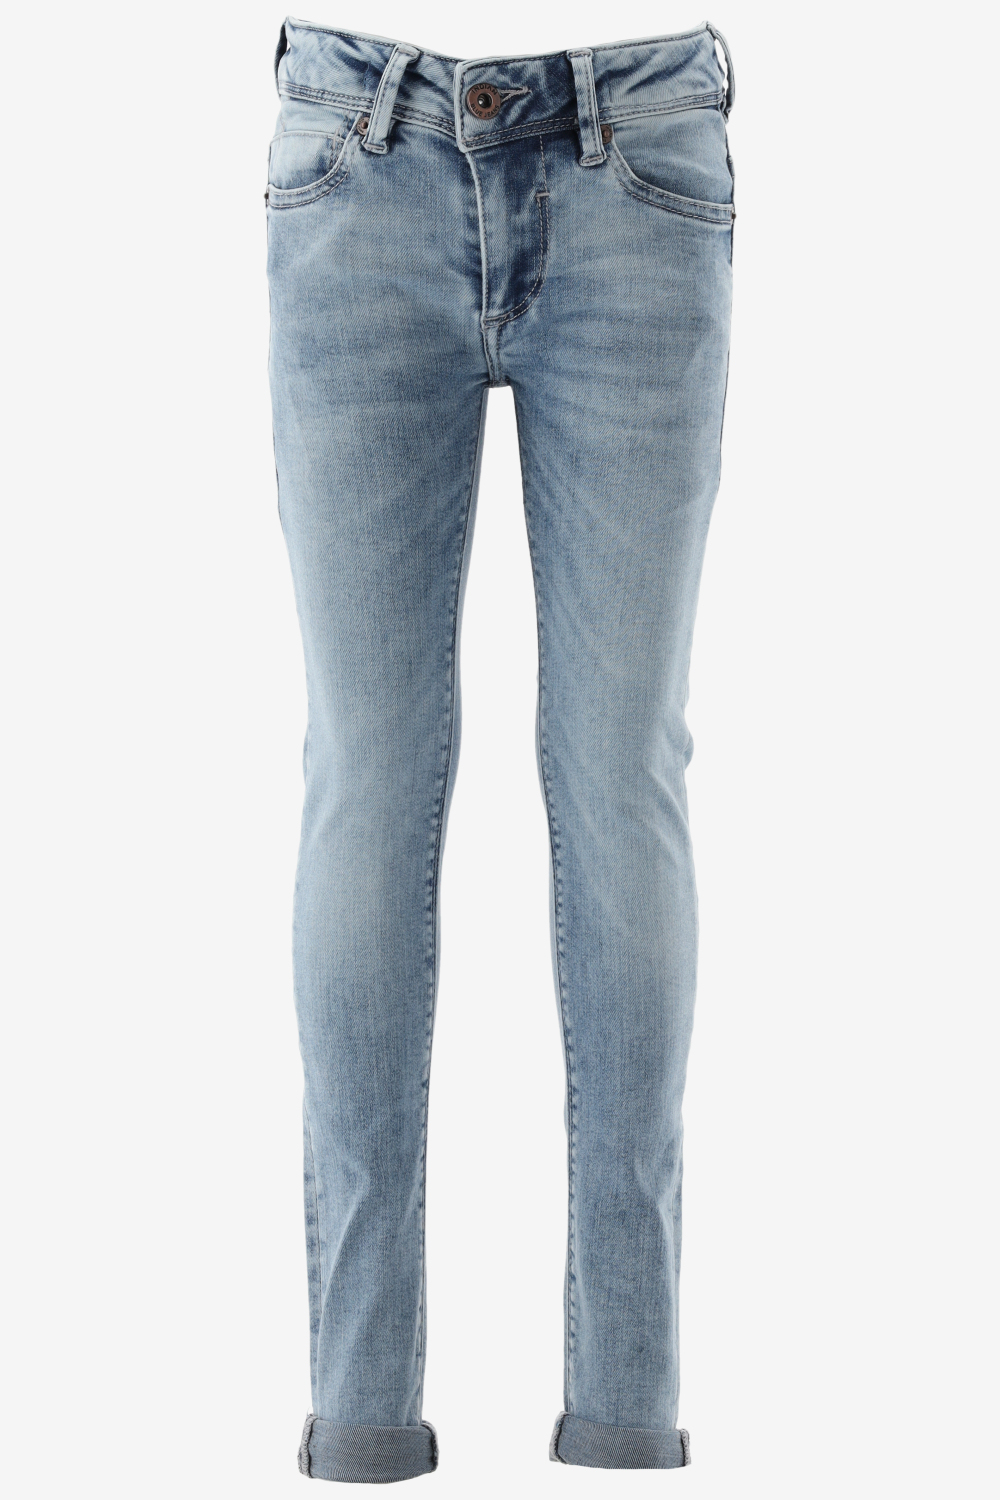 Indian Blue Skinny Fit